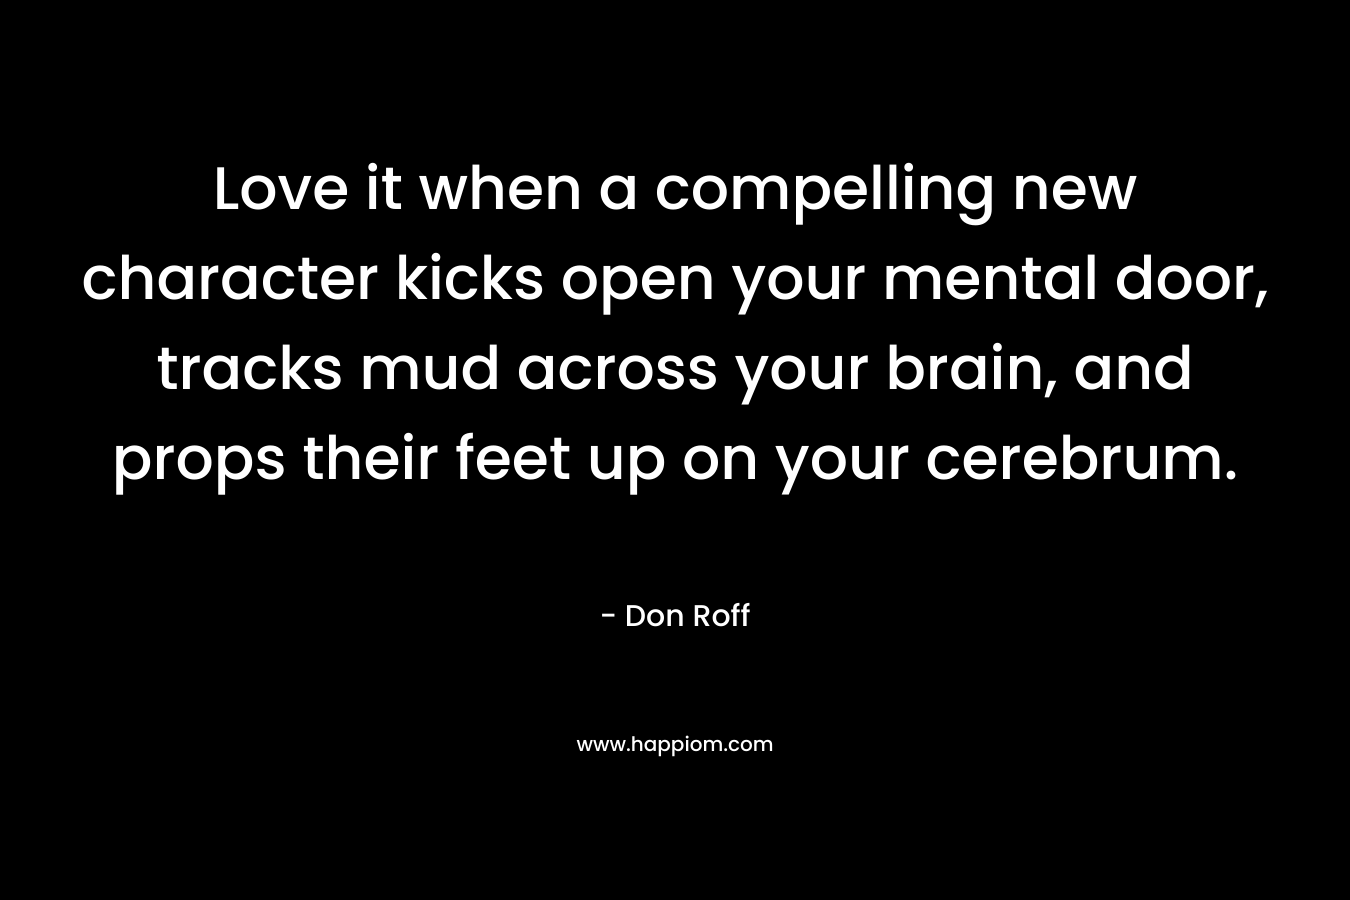 Love it when a compelling new character kicks open your mental door, tracks mud across your brain, and props their feet up on your cerebrum. – Don Roff